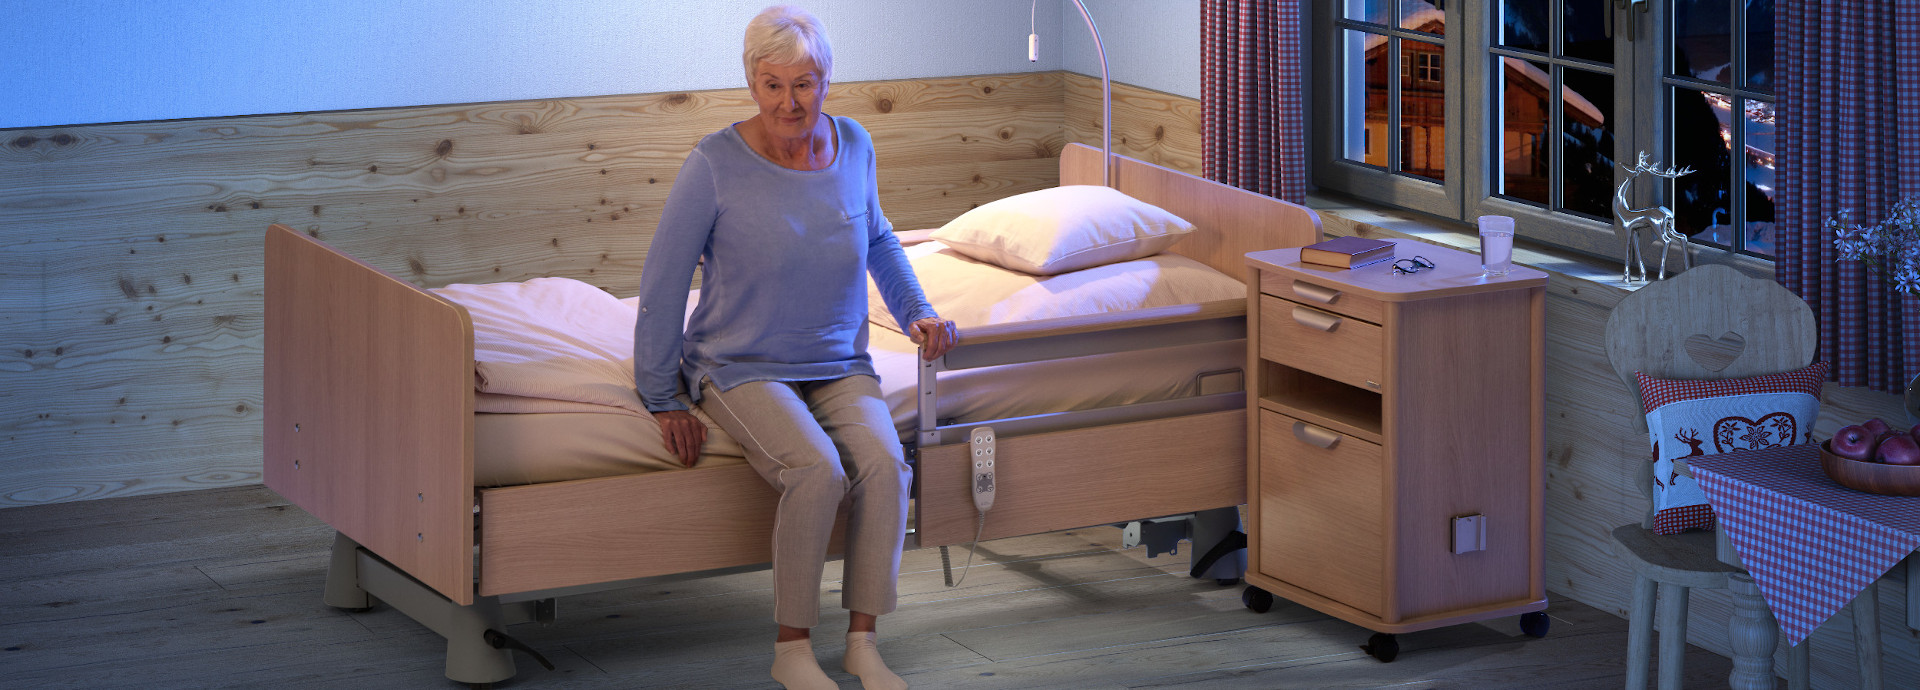 The carisma sc low nursing bed supports care at the highest level while improving the comfort and quality of life of your residents.